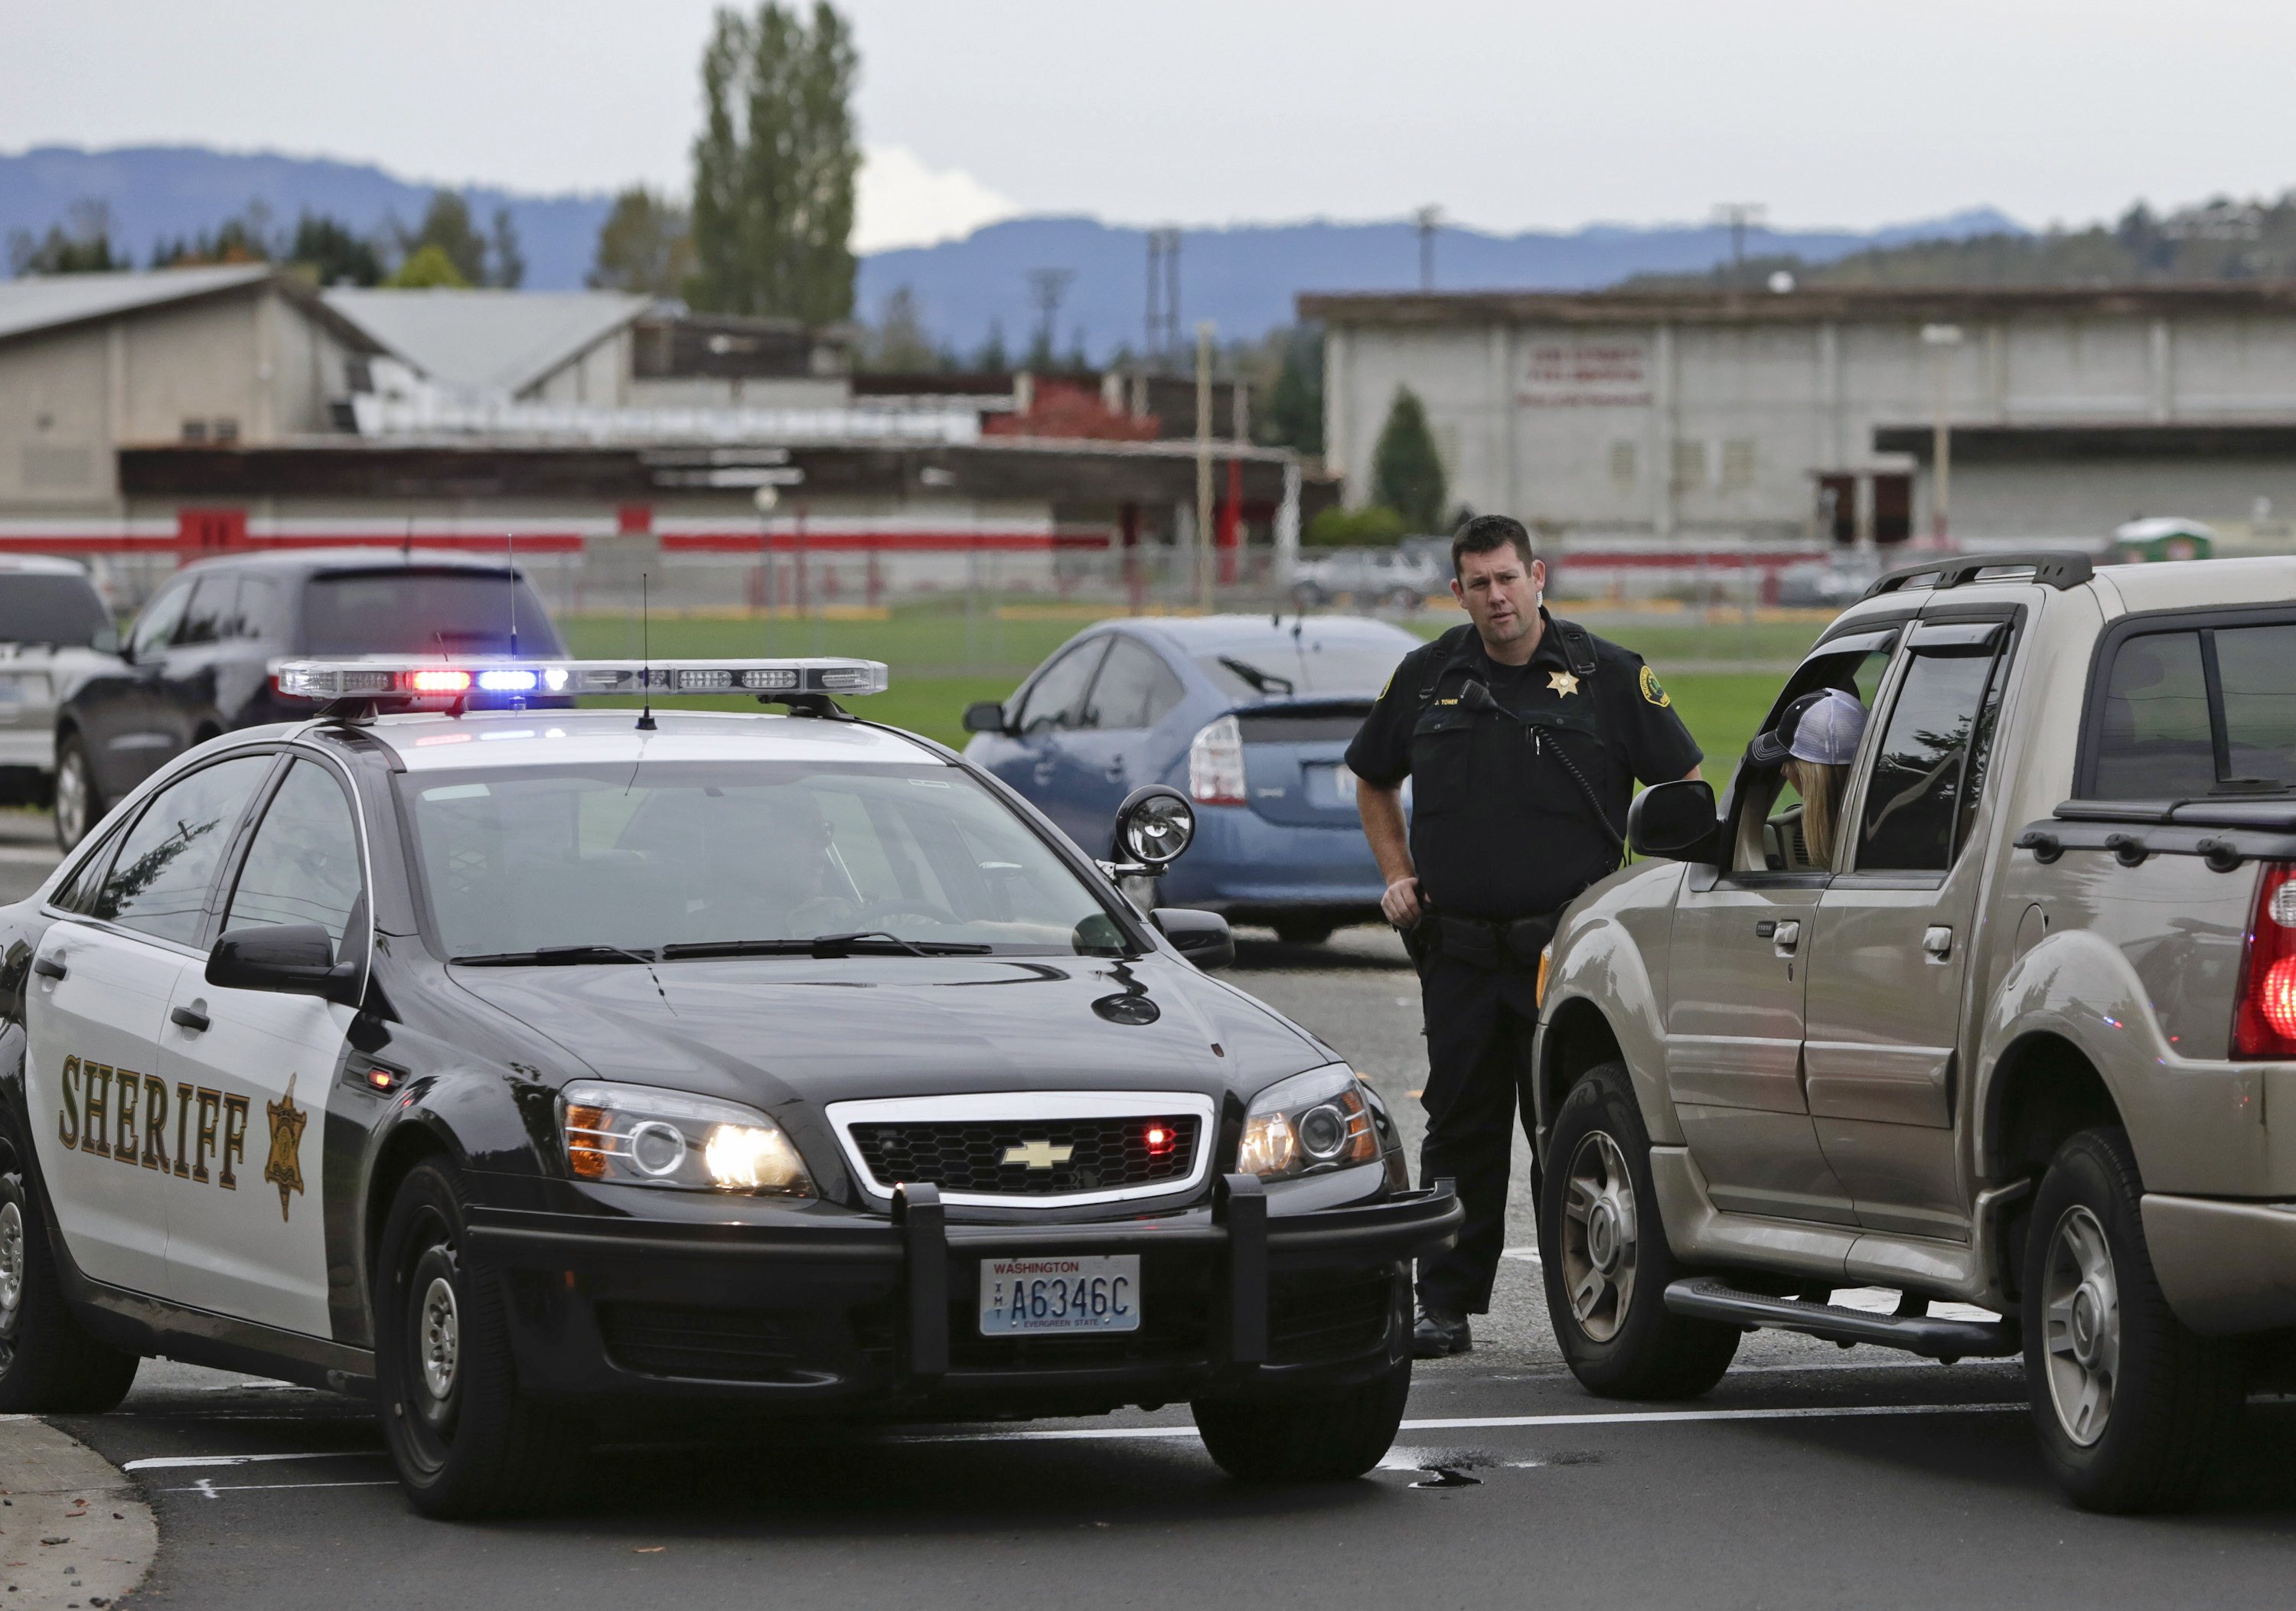 Two killed, four wounded in Washington state school shooting